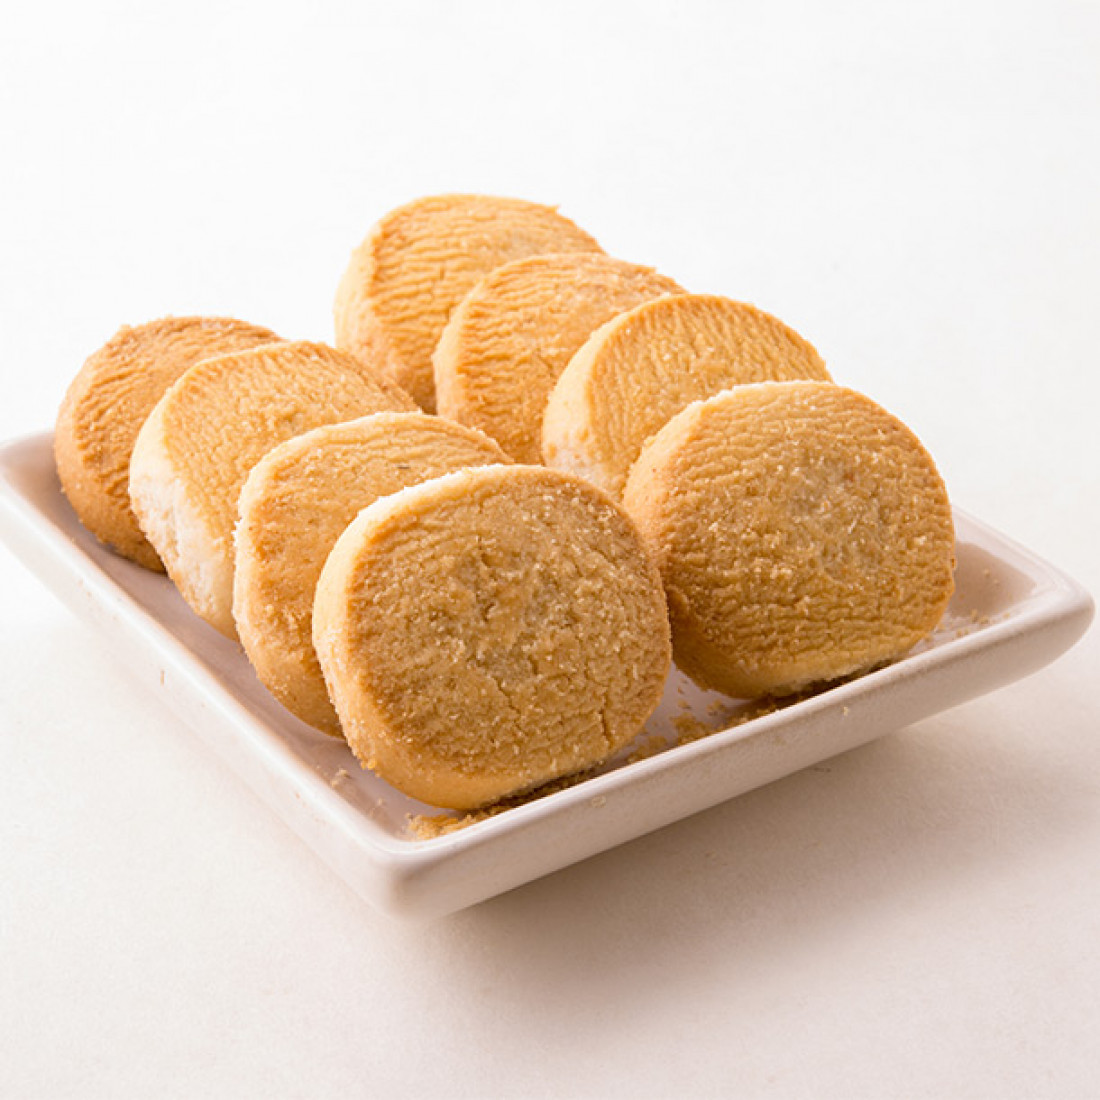 Osmania Biscuit